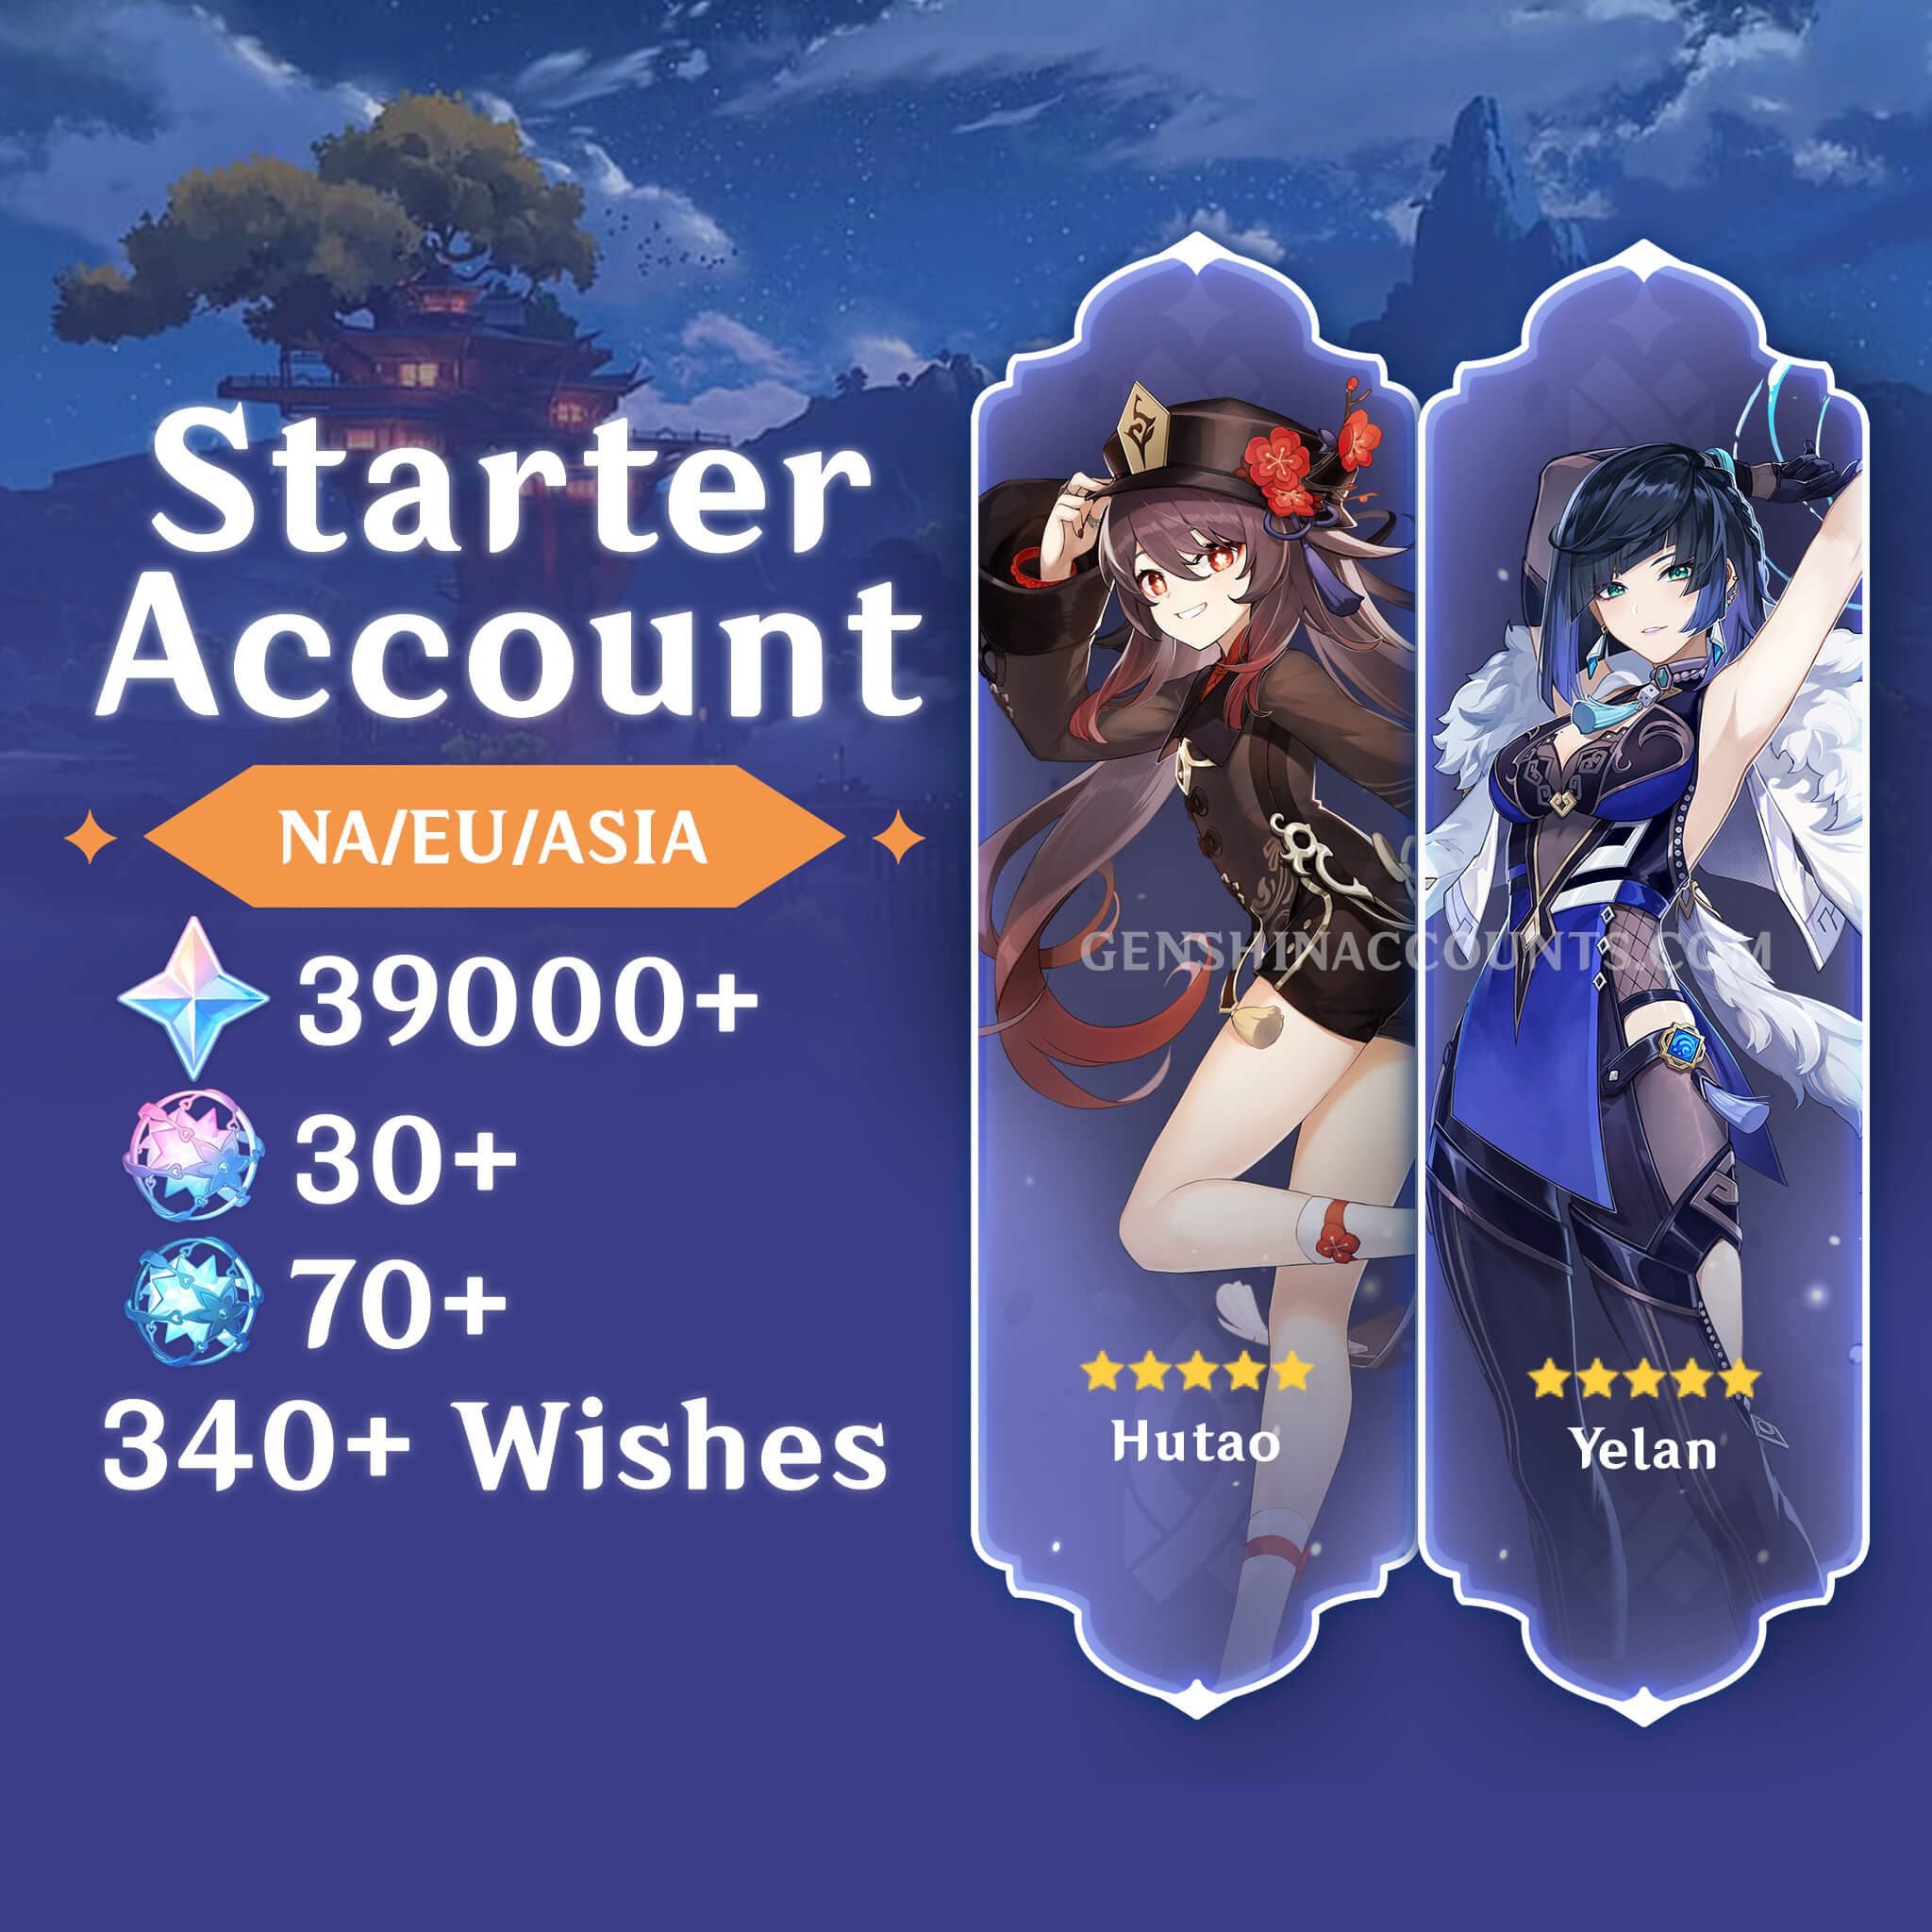 Ar 56 / Yelan or Hu-tao? For my account / currently going for Xiao but not  sure/ Spiral Abyss Team Suggestions? : r/Genshin_Impact